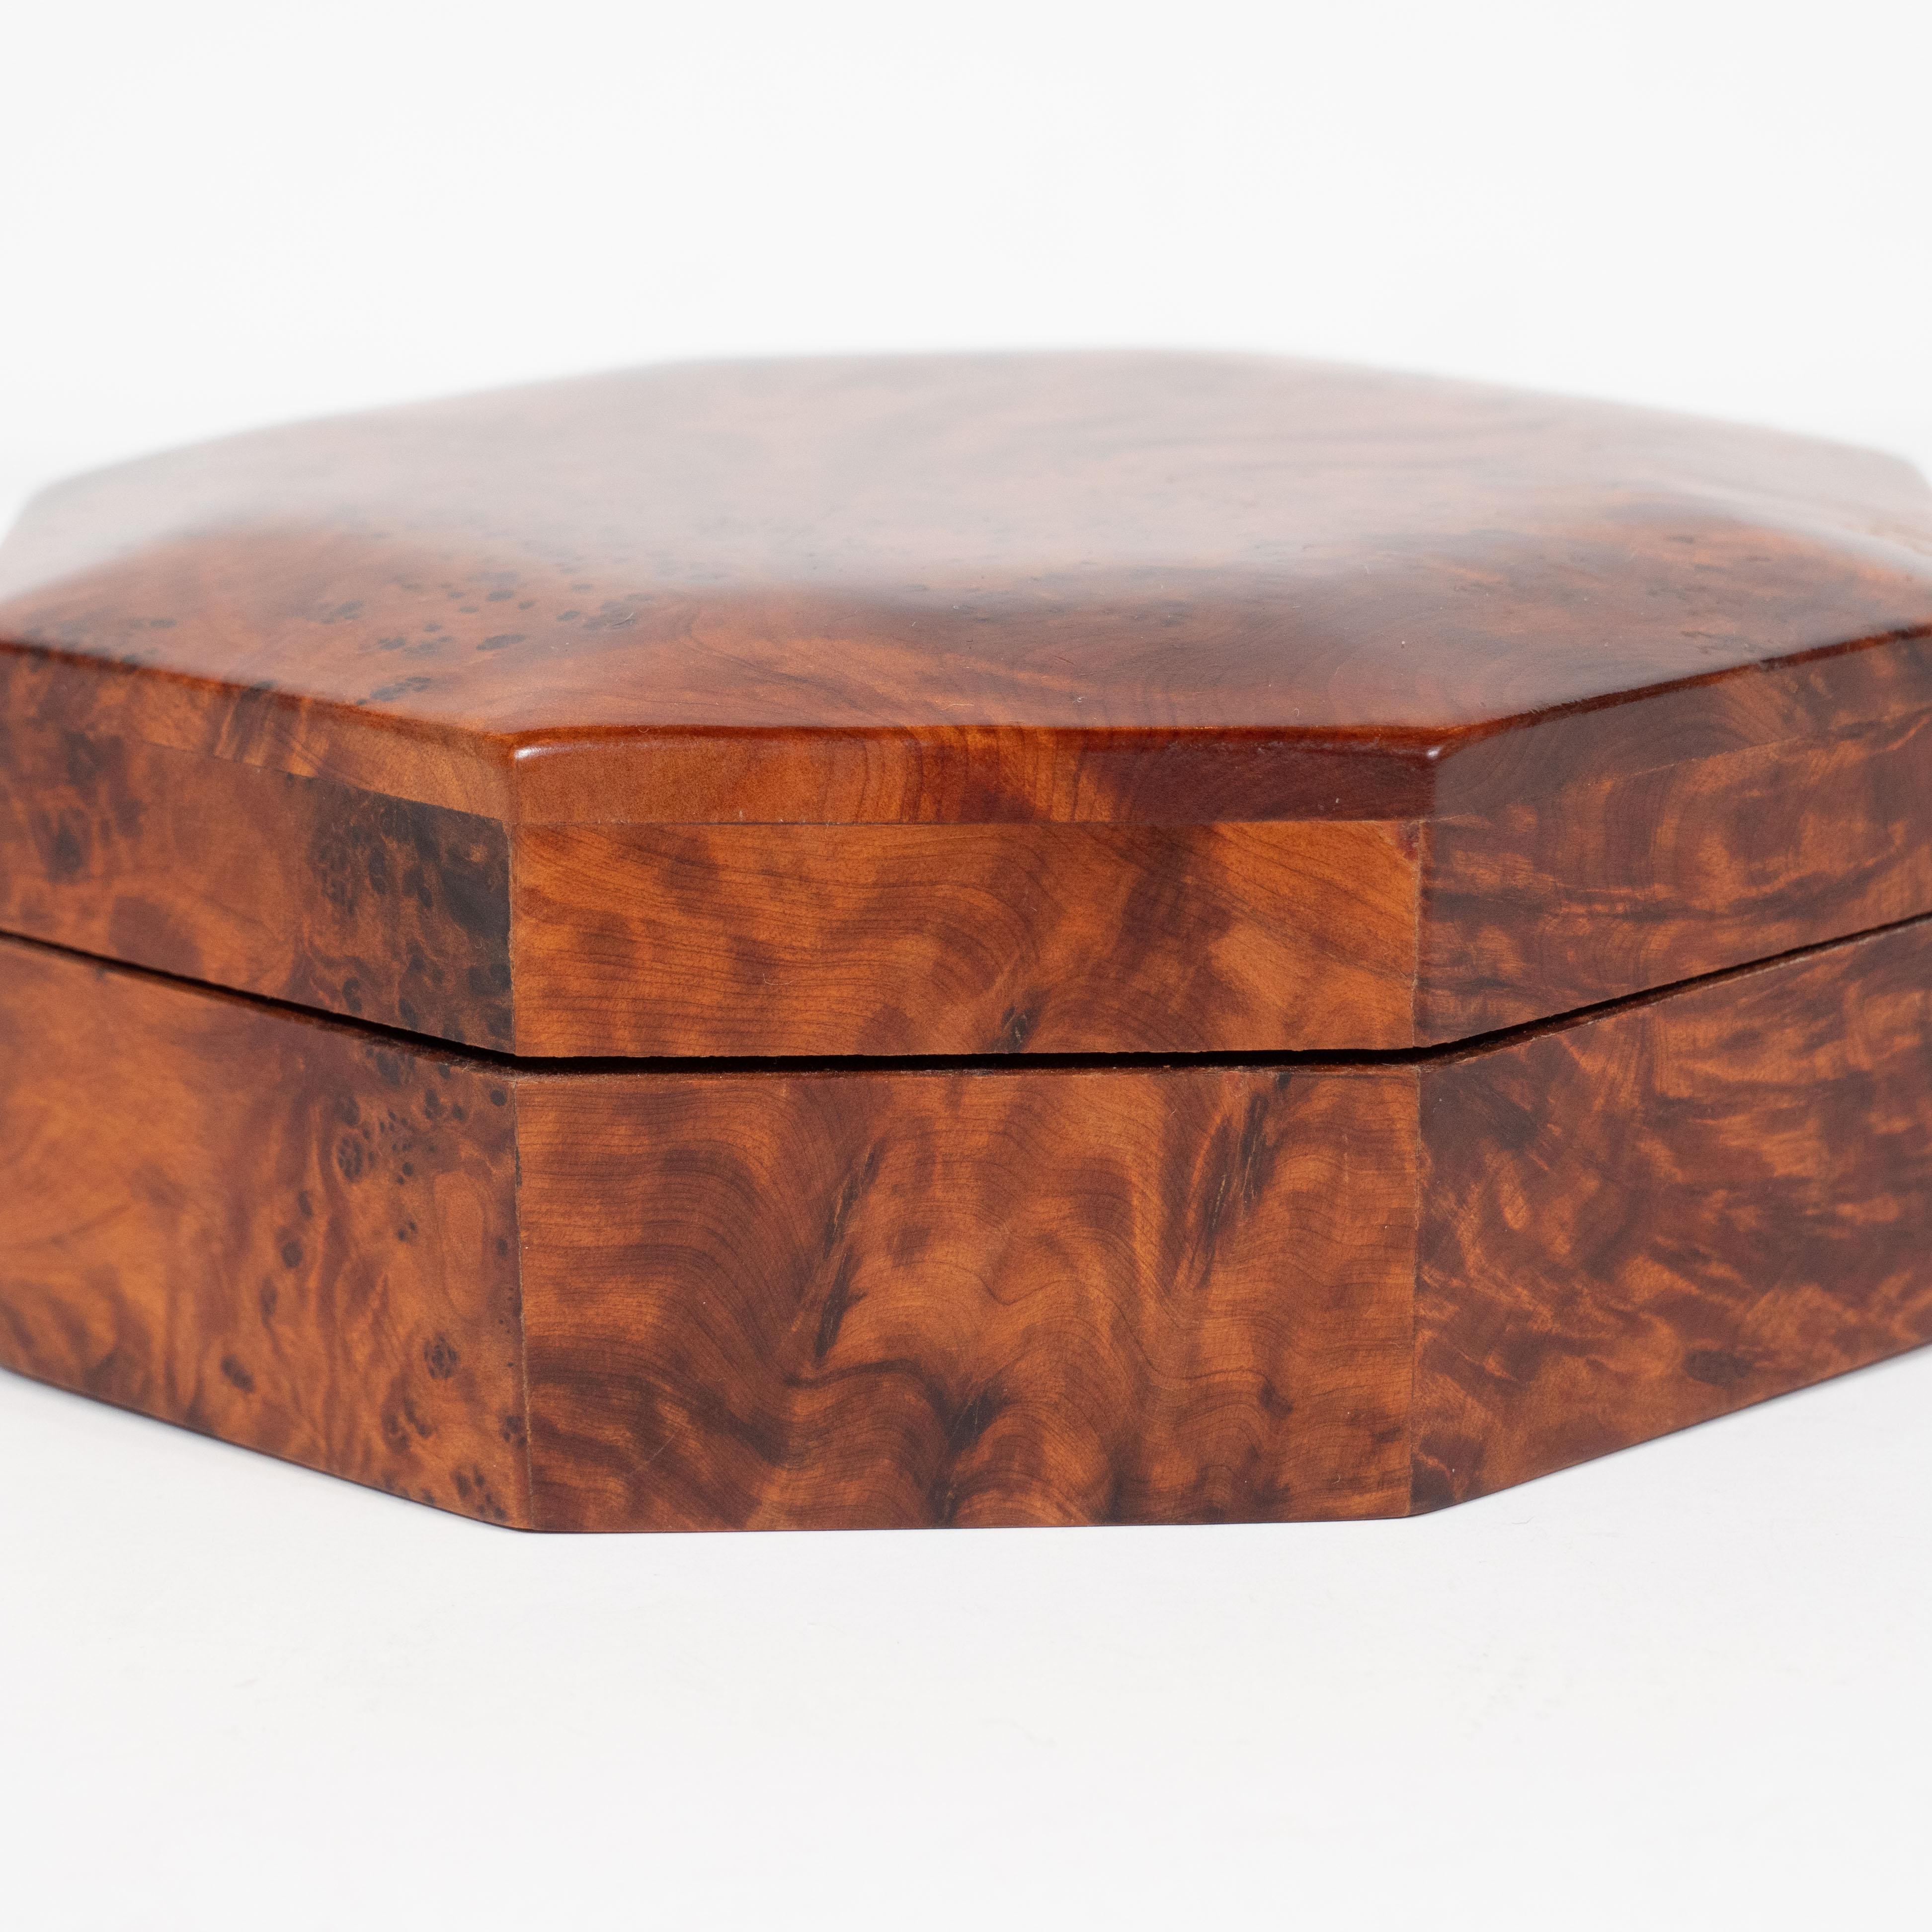 This elegant Art Deco box was realized in the United States, circa 1930. It features an octagonal form in beautiful burled carpathian elm that showcases the naturally exquisite grain of the wood. Organic, refined and quintessentially Art Deco in its